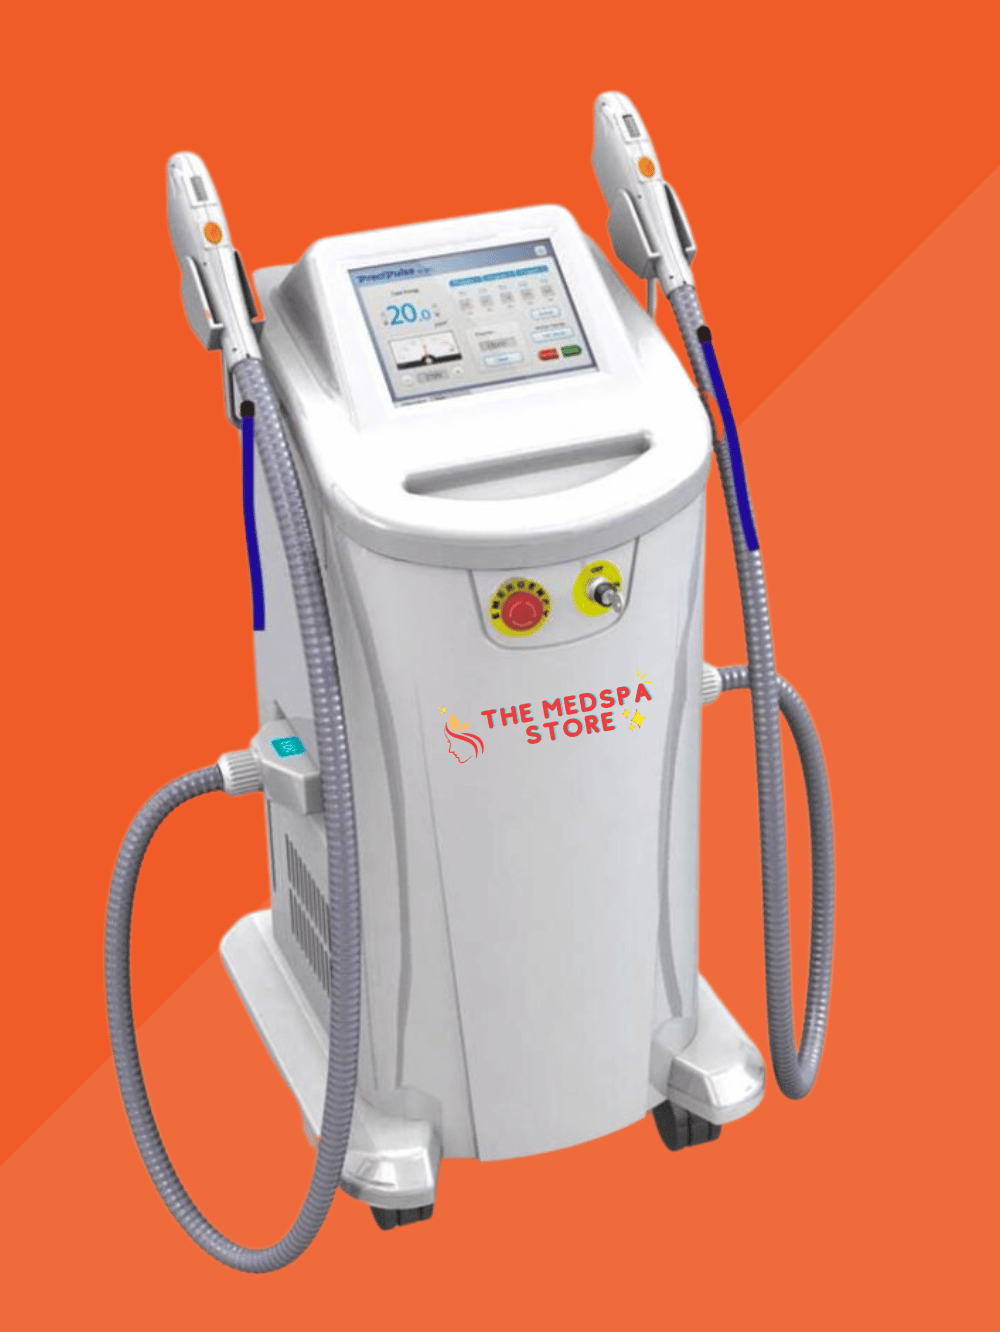 Youth Pro 3-in-1 IPL Skin Rejuvenation and Hair Removal System